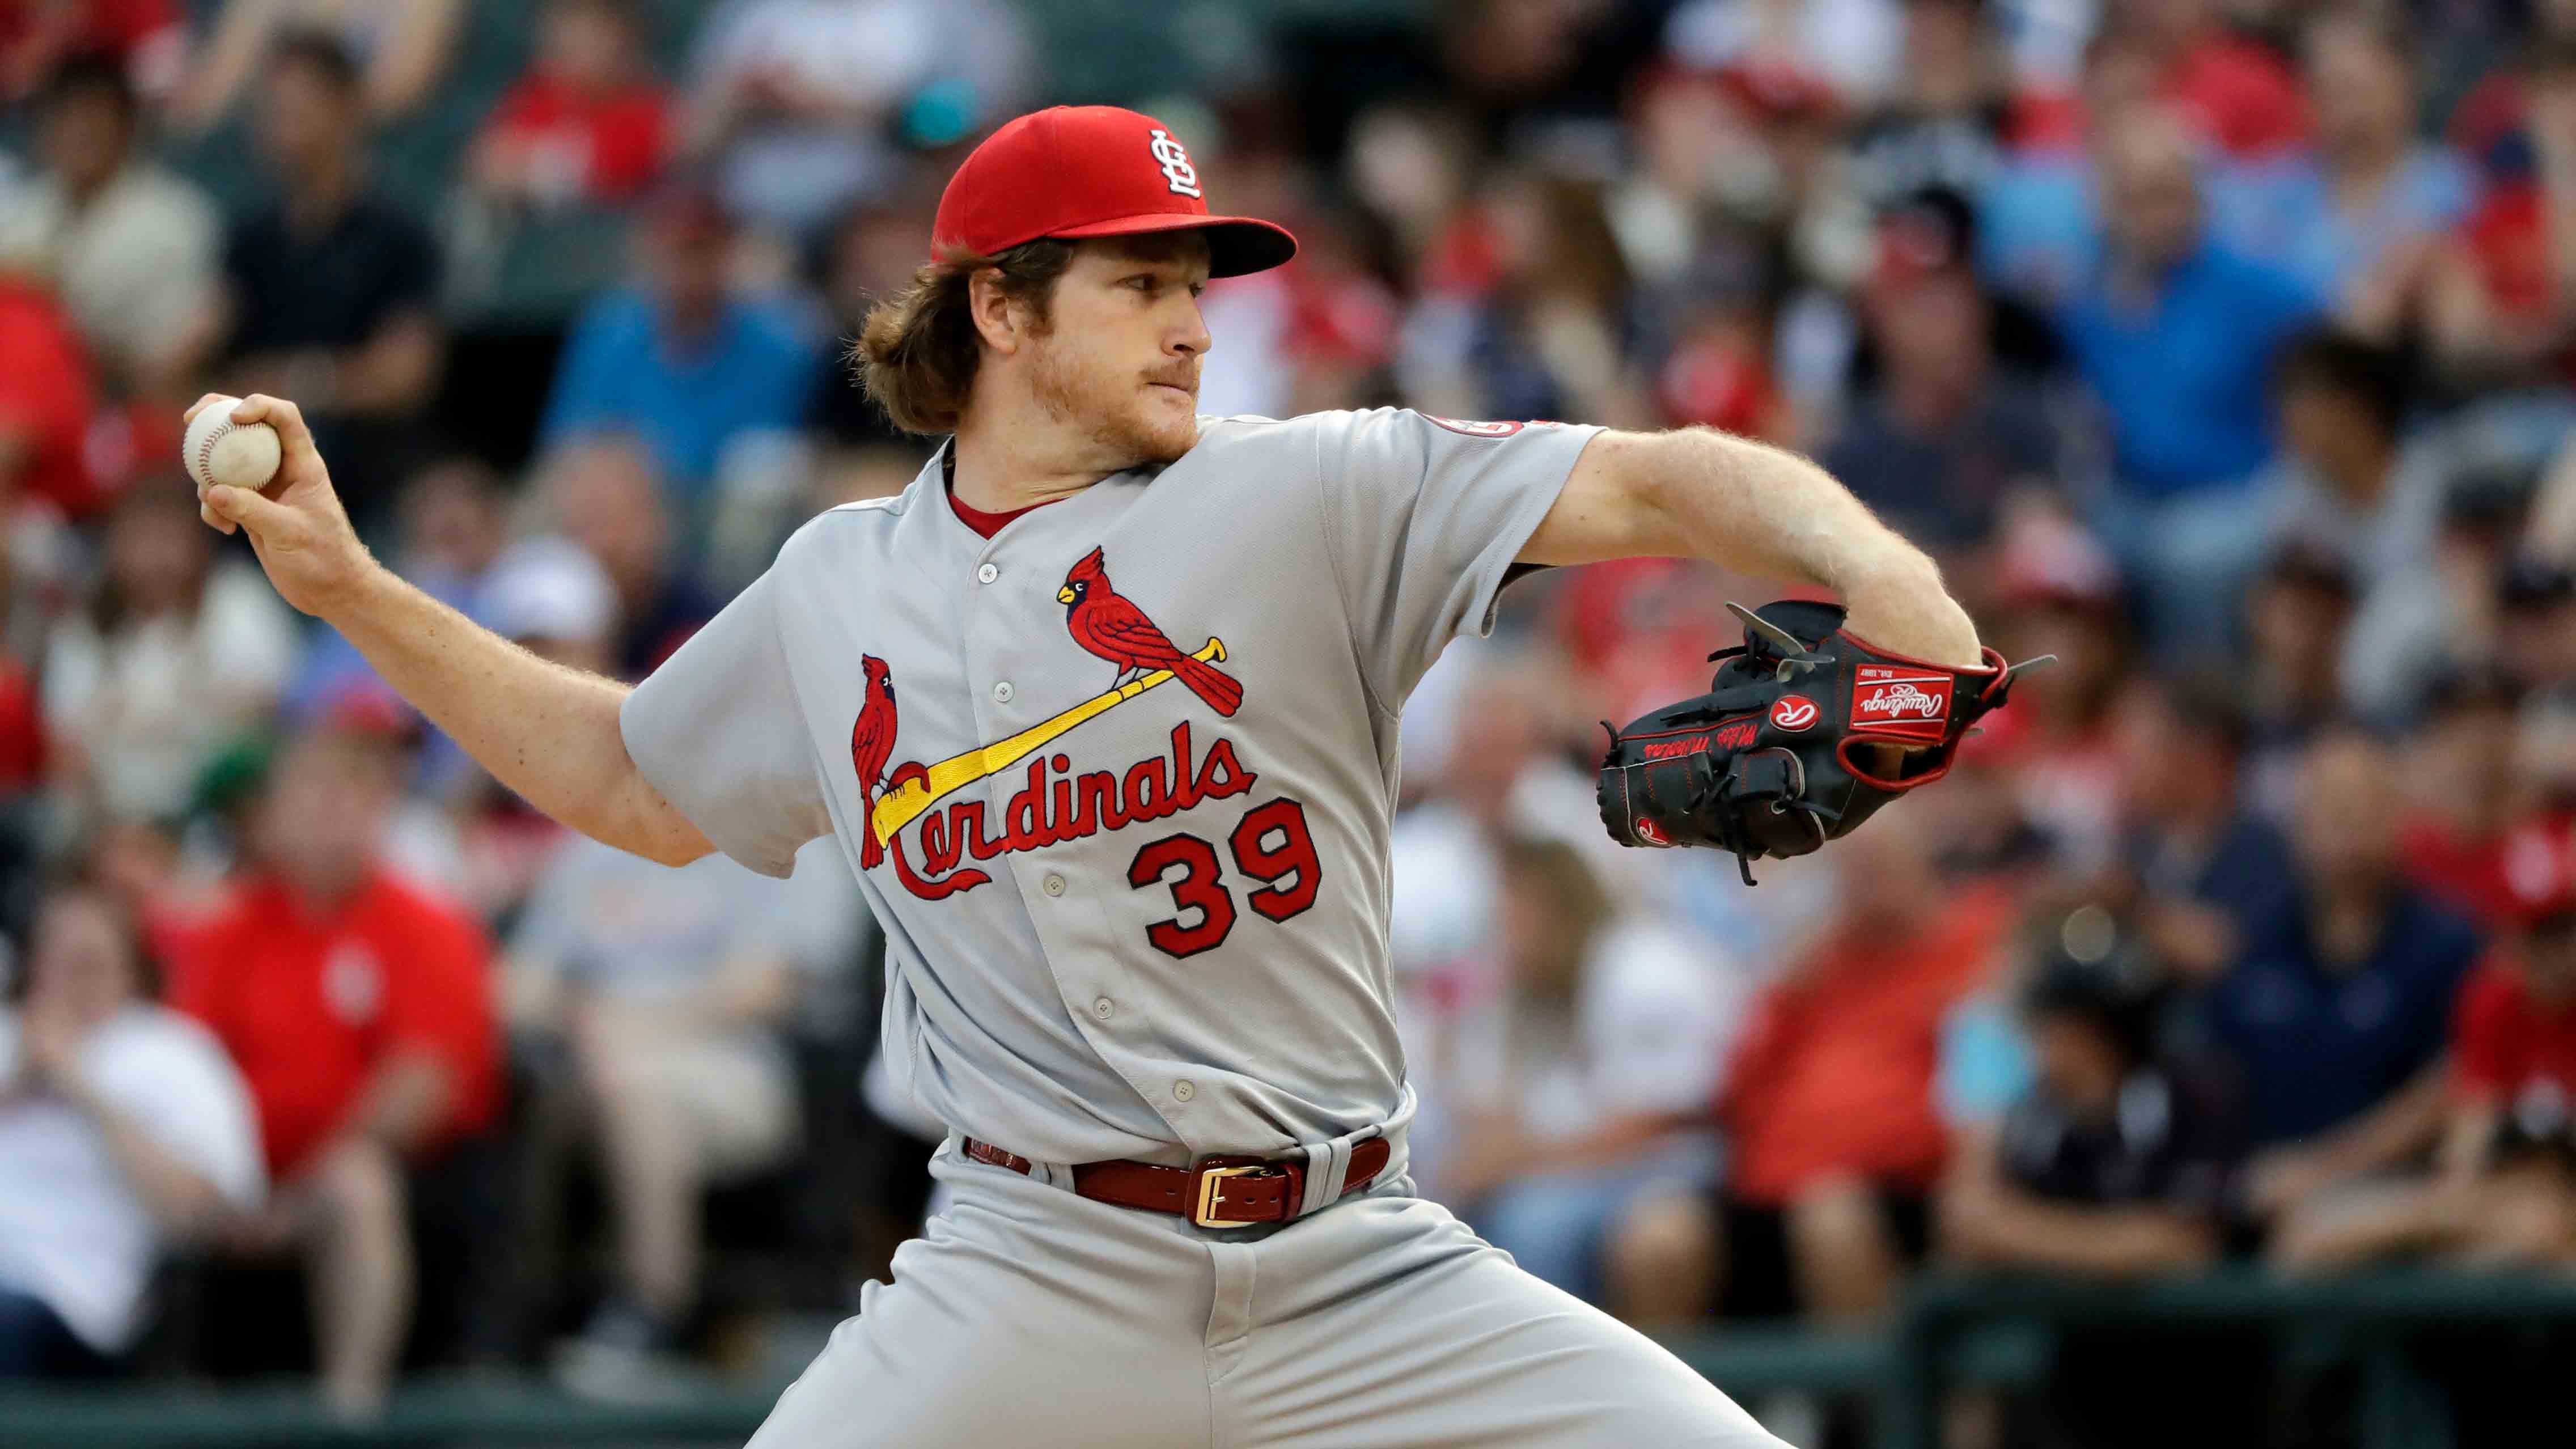 Mikolas won't pitch in All-Star Game after being scheduled to start Sunday for Cards